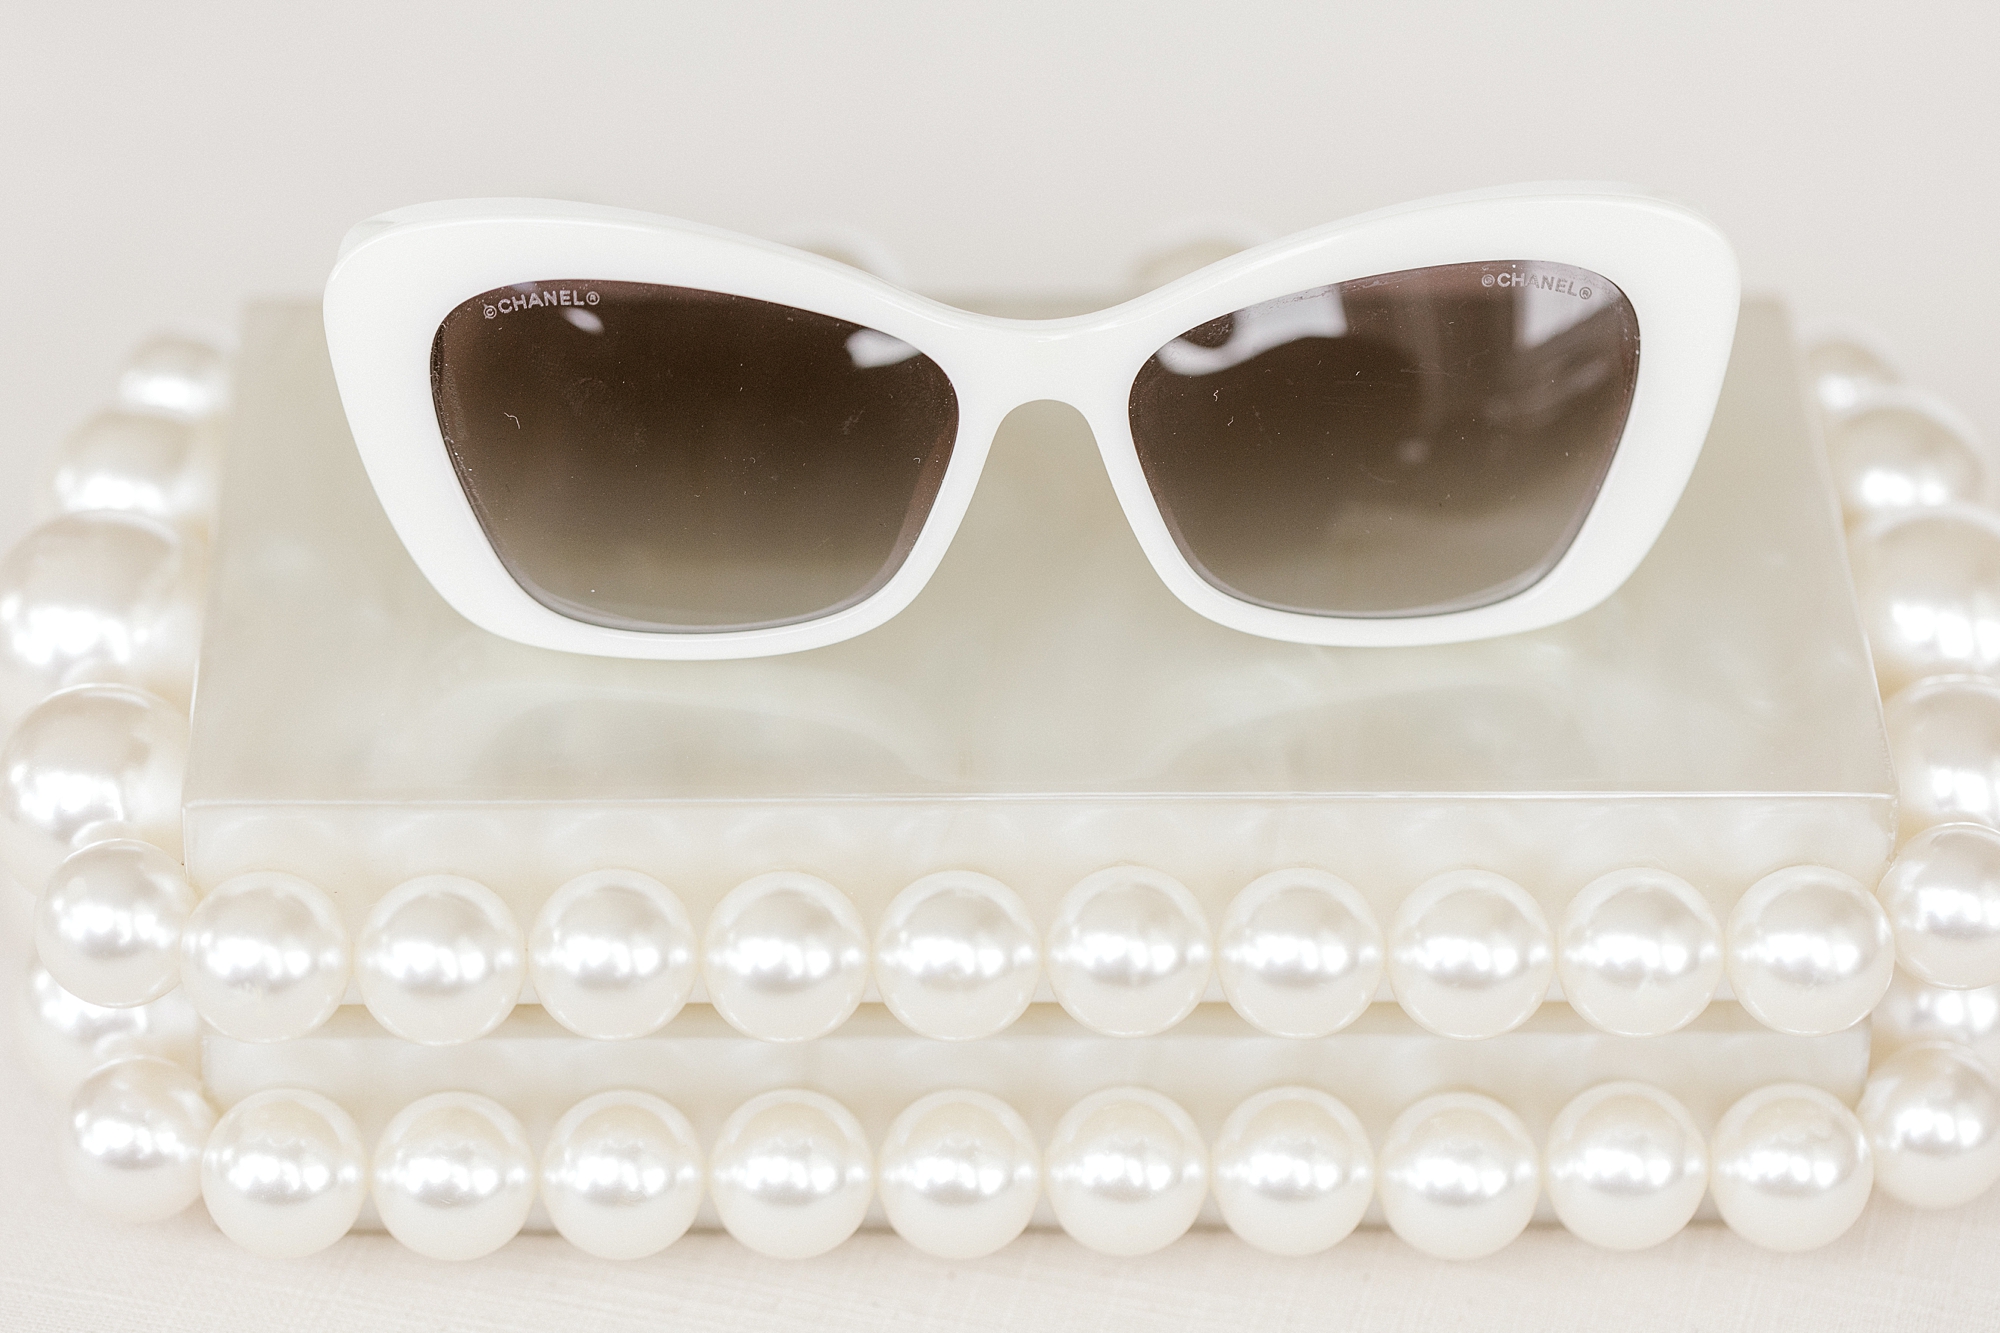 pearls lay around white sunglasses for LBI wedding day